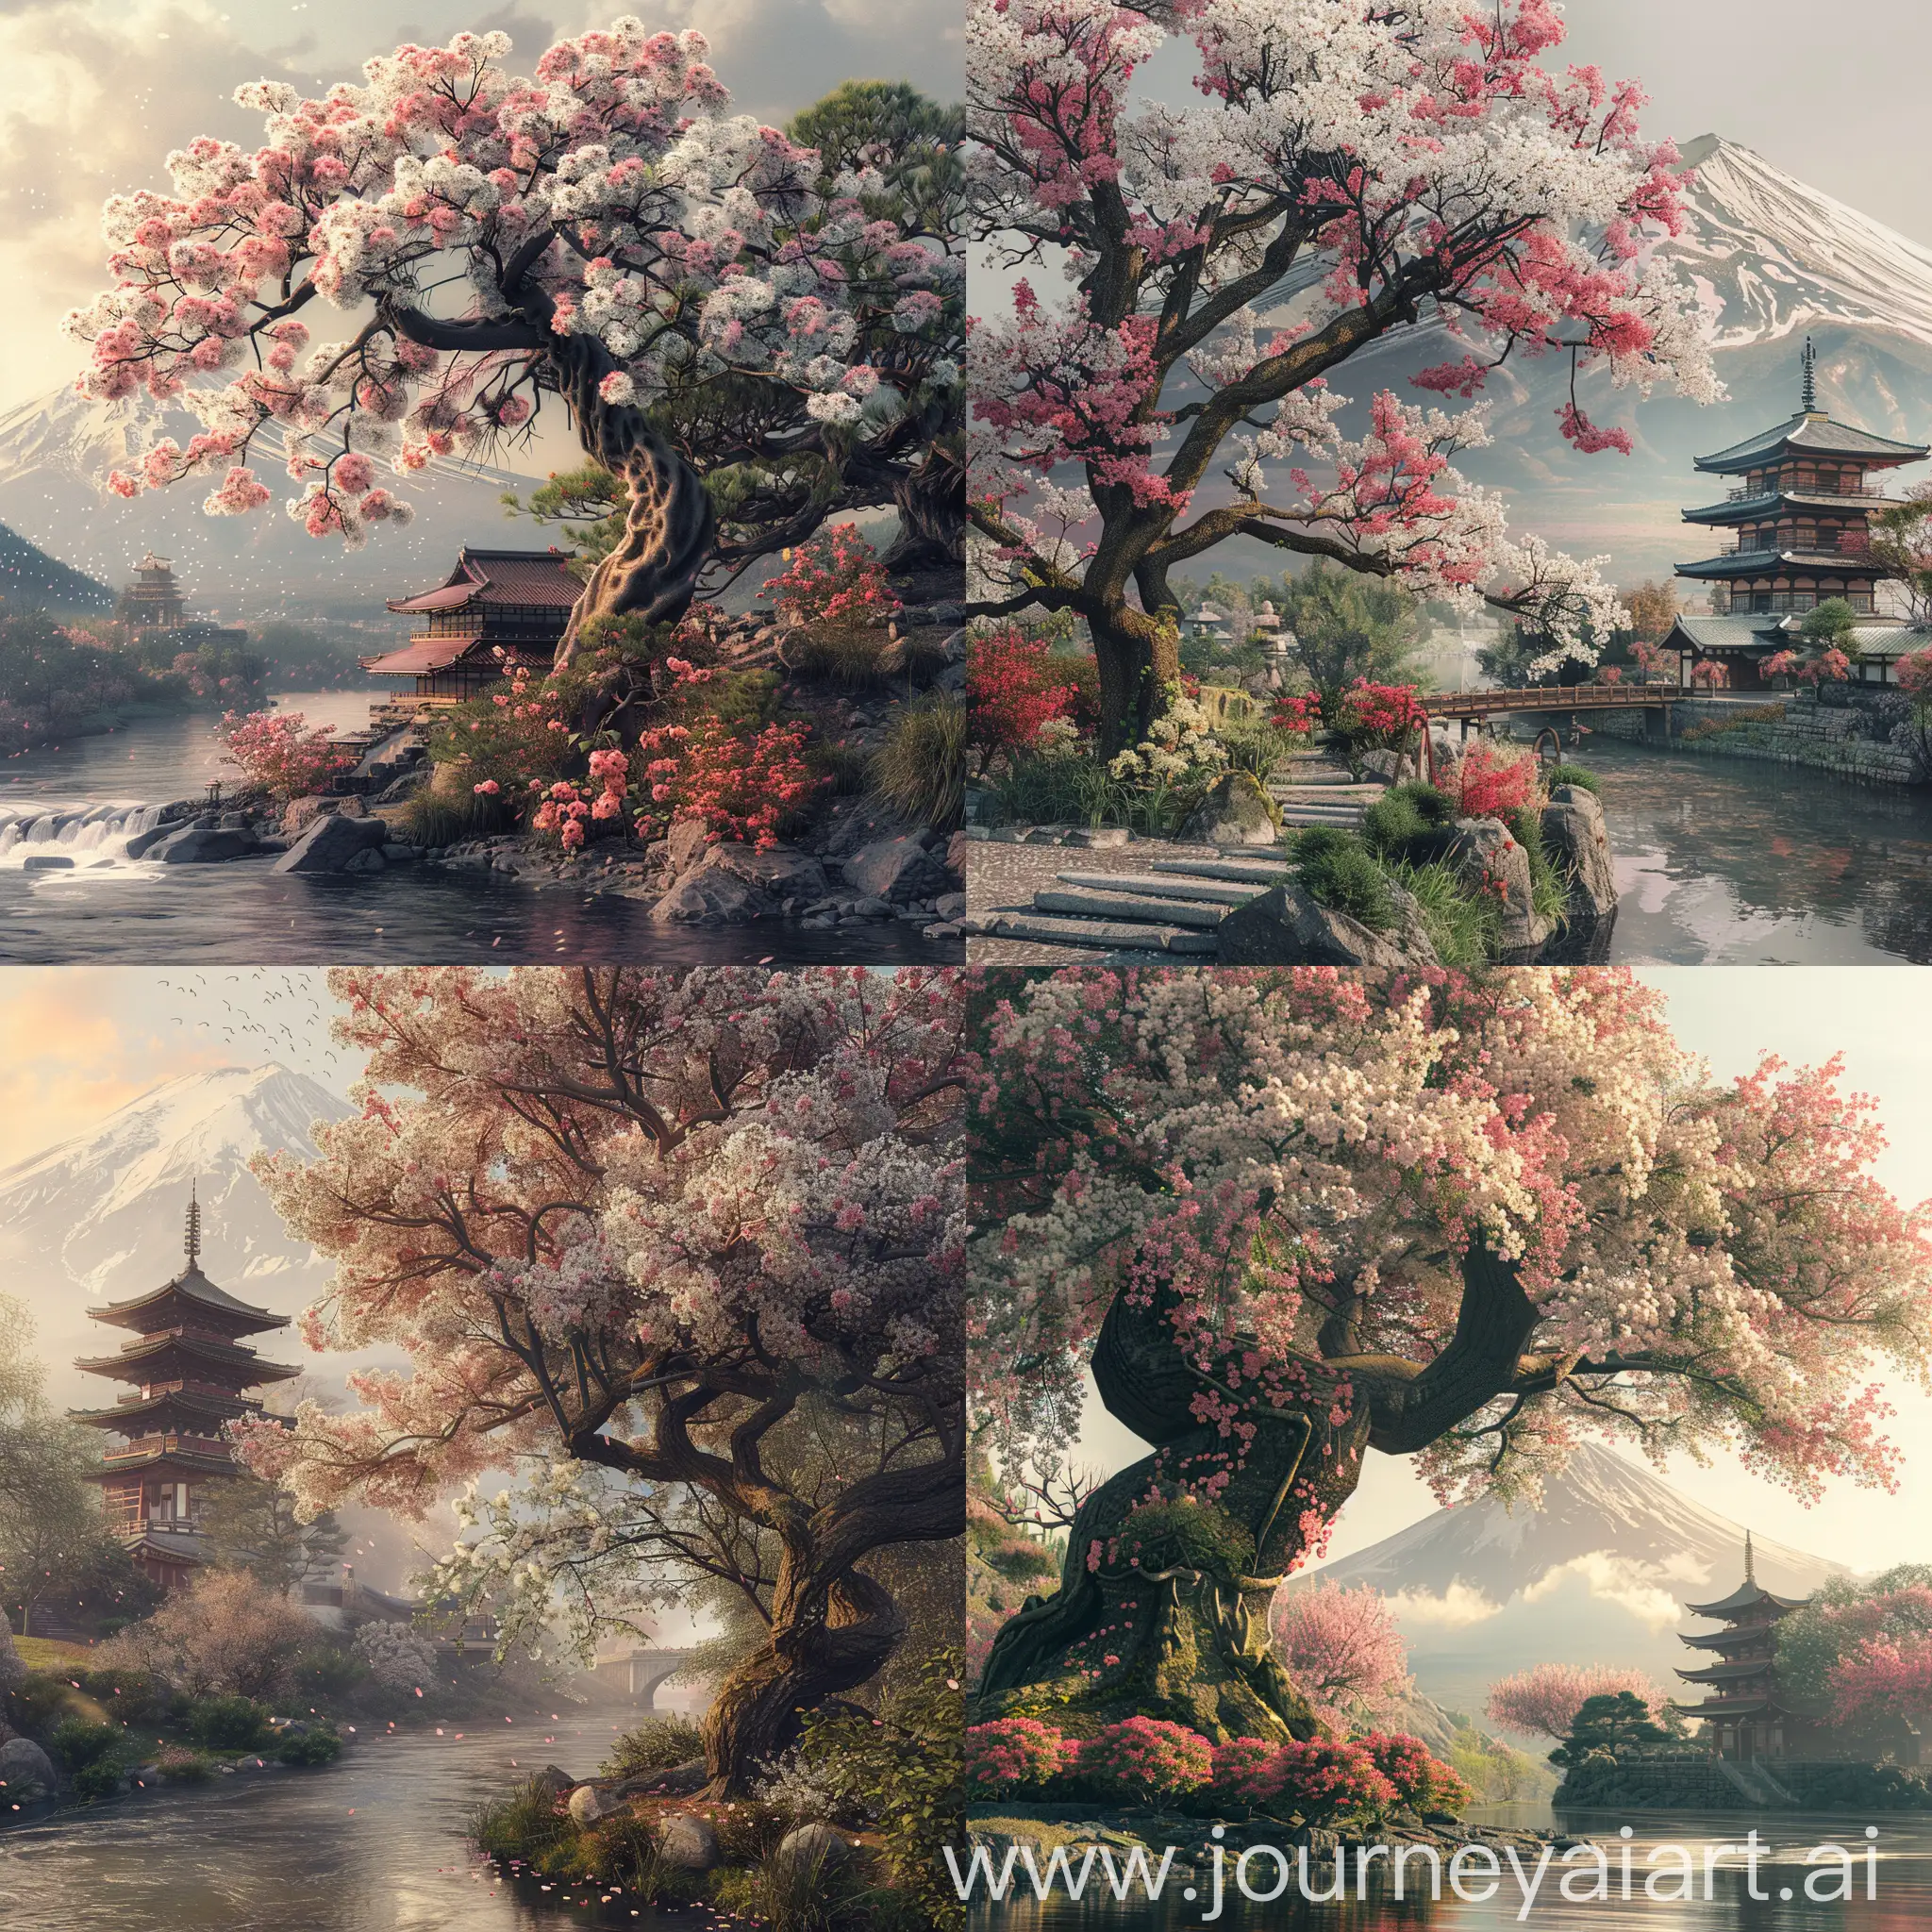 Tranquil-Japanese-Sakura-Tree-by-the-River-with-Mount-Fuji-and-Temple